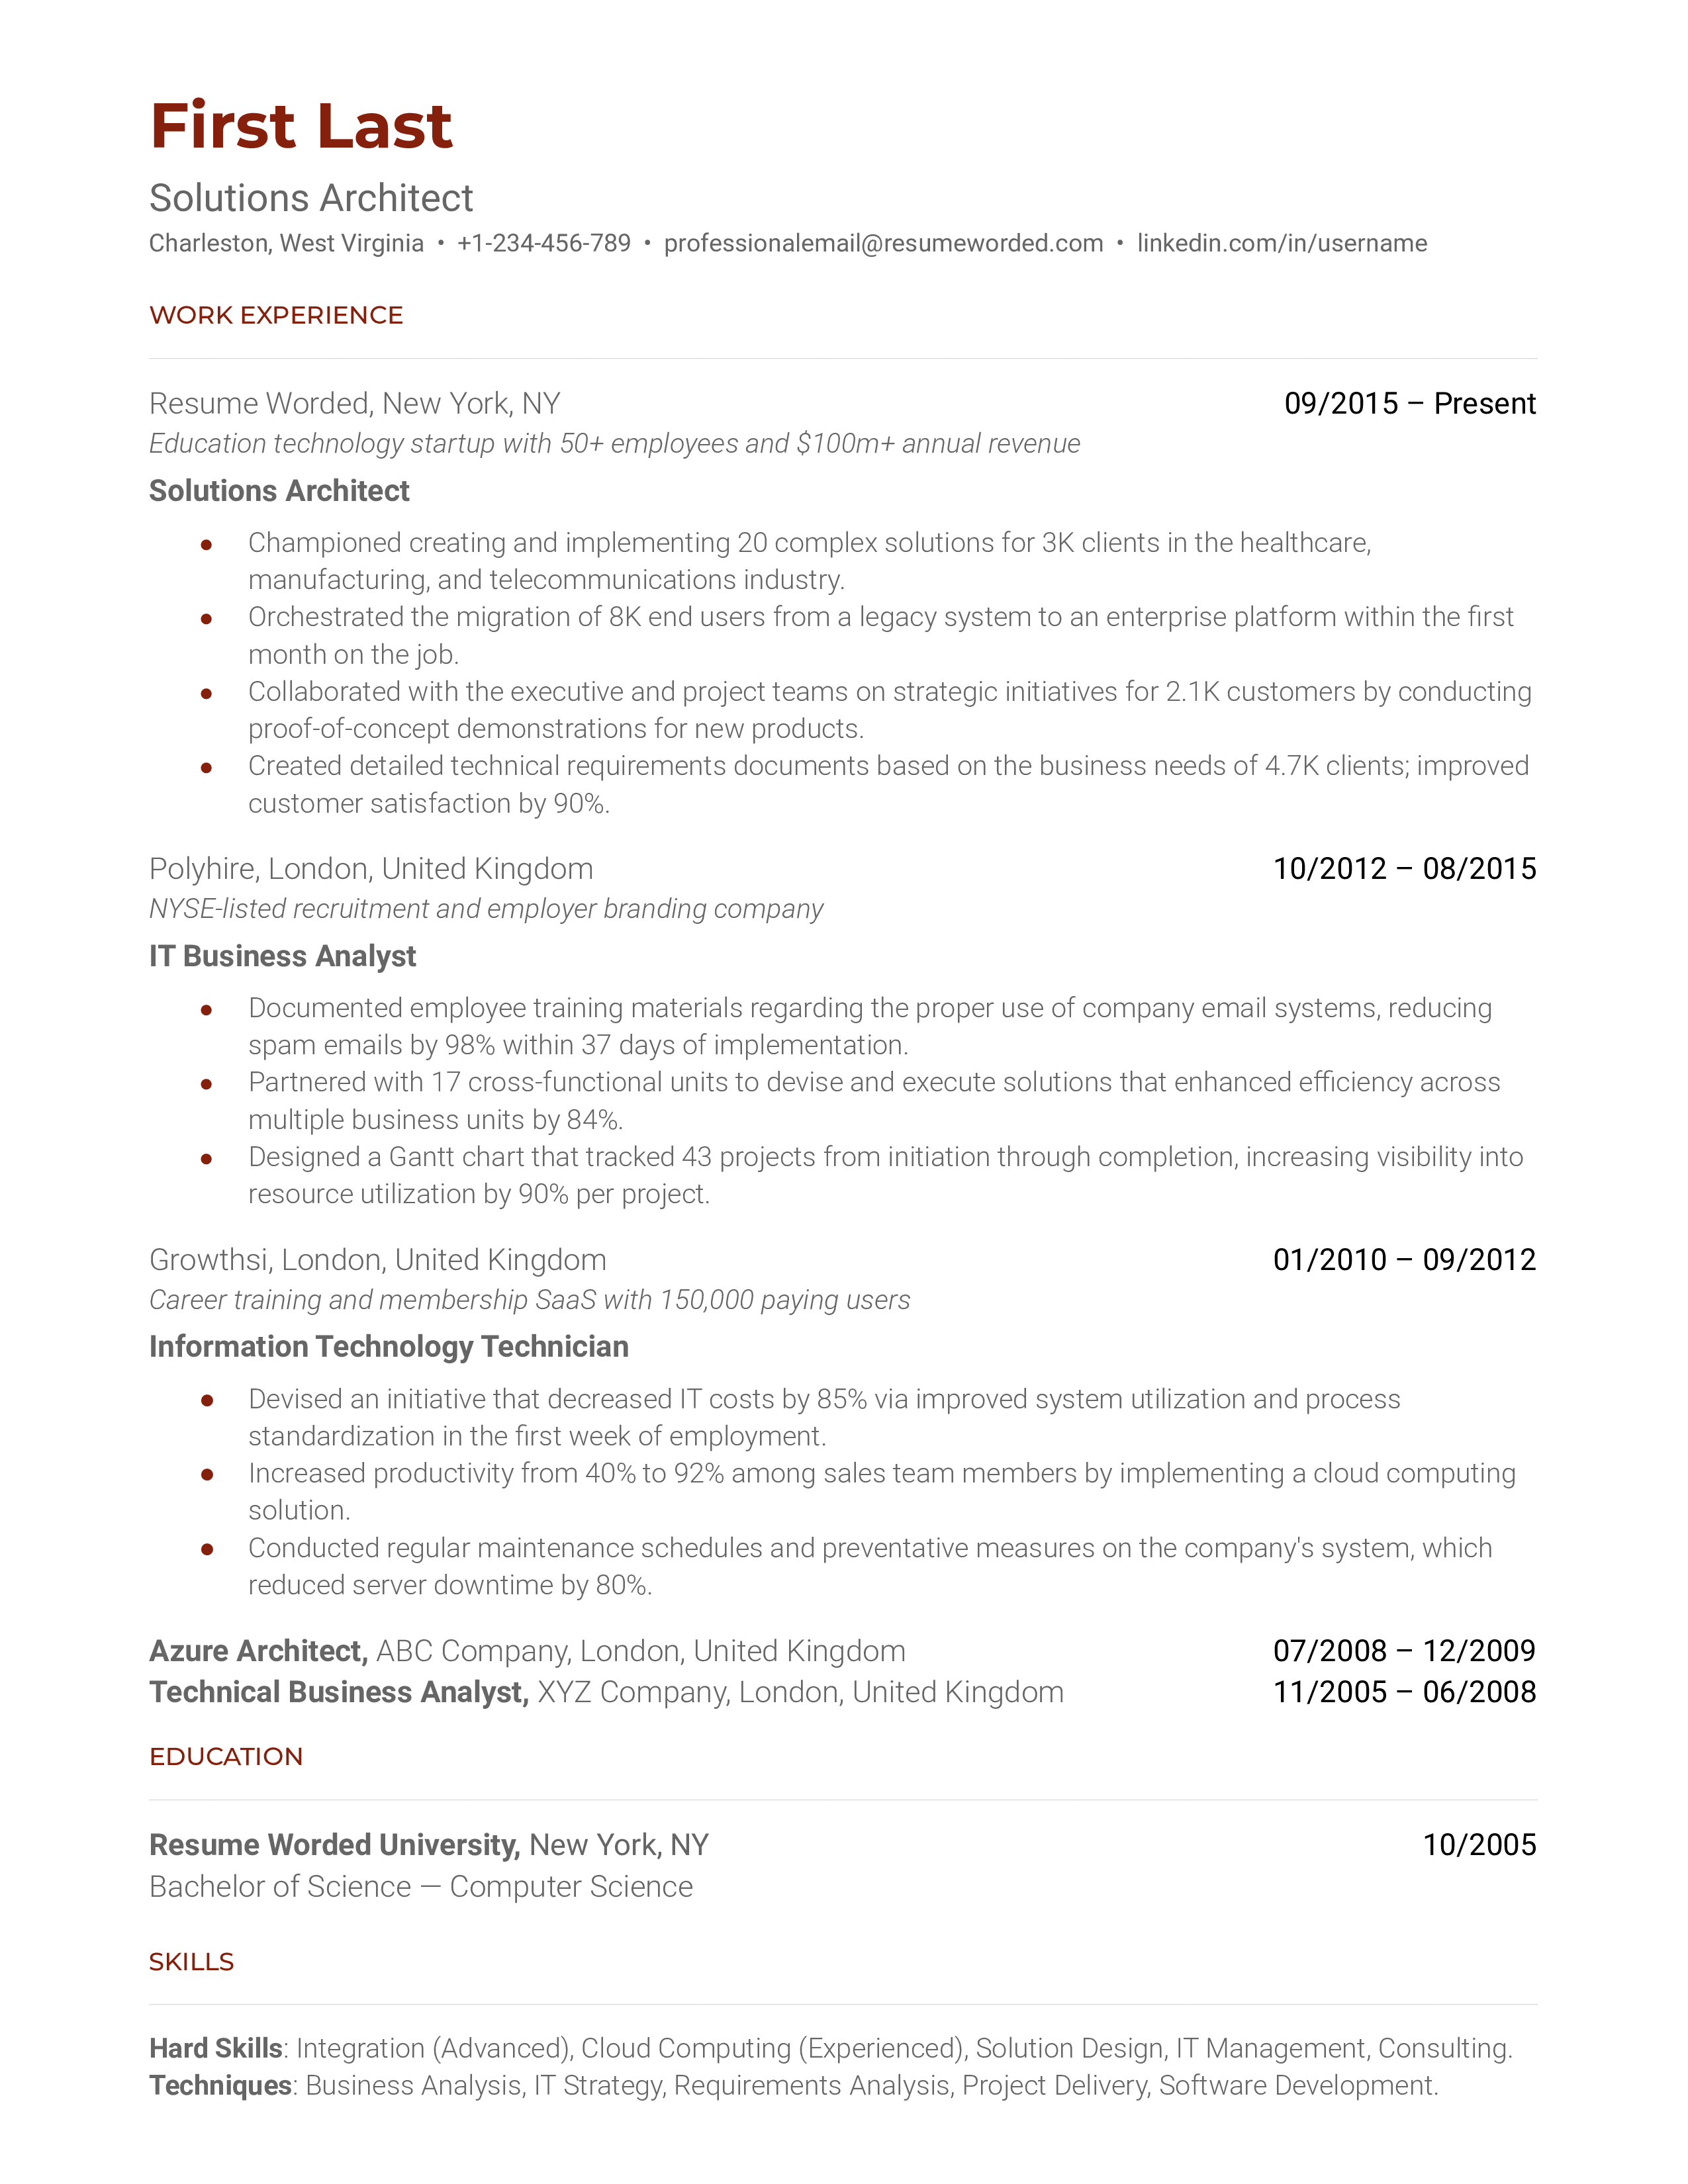 A solutions architect resume template that organizes work experience chronologically